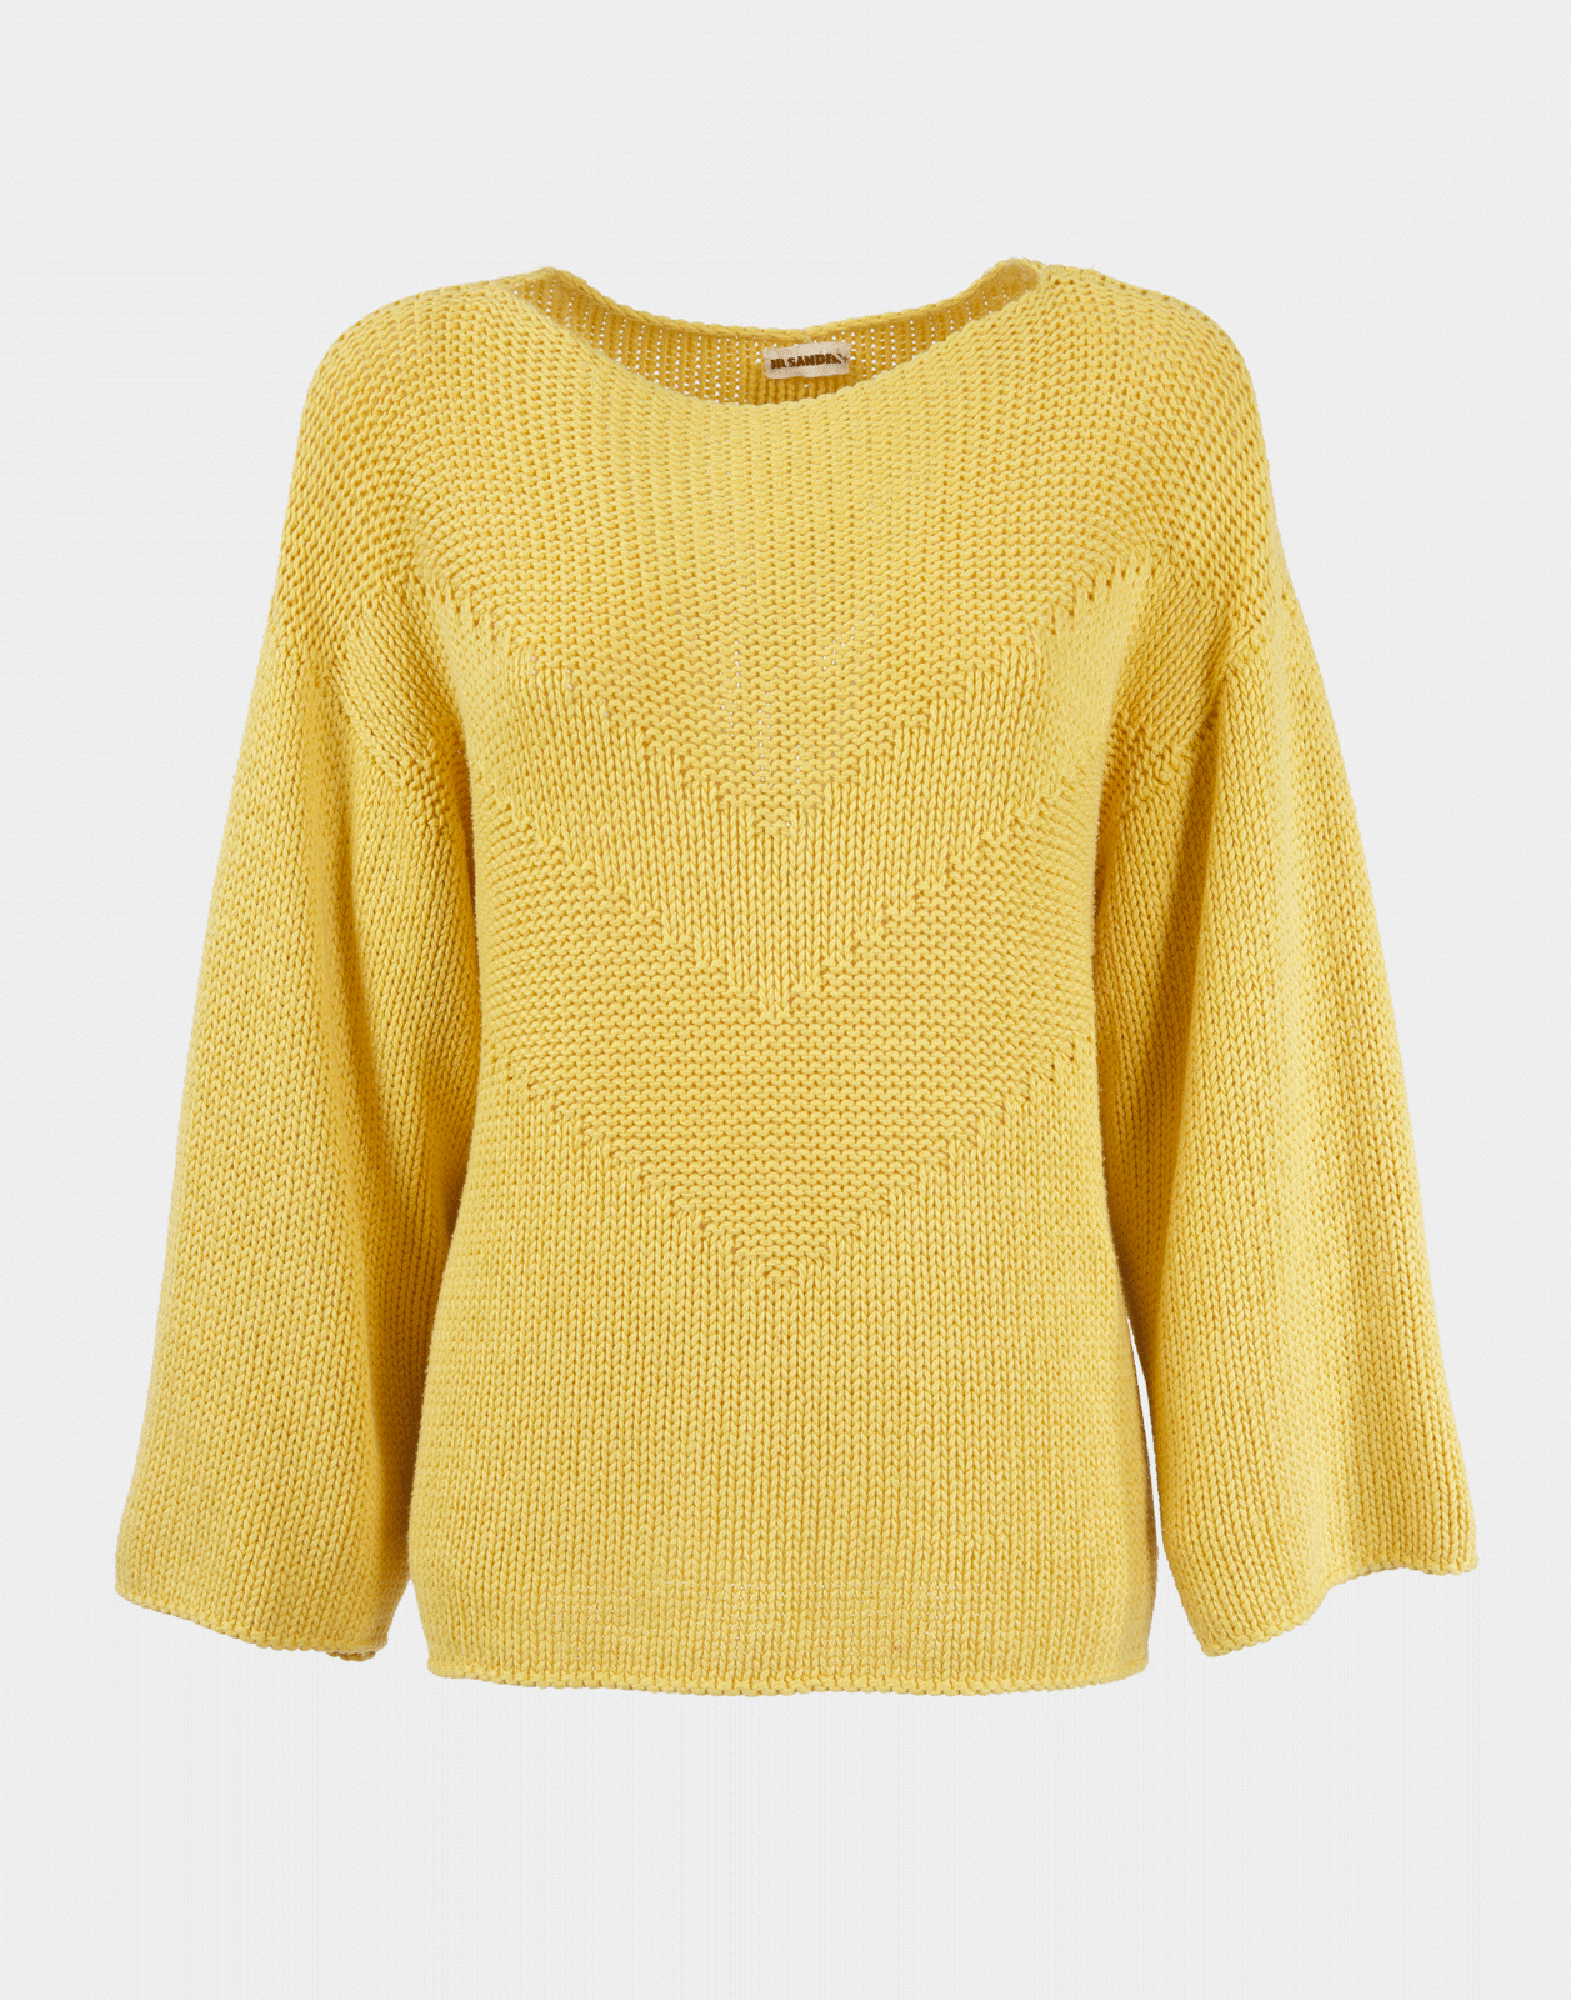 yellow cotton ladies' jumper by jil sander, photographed on ghost mannequin with grey background